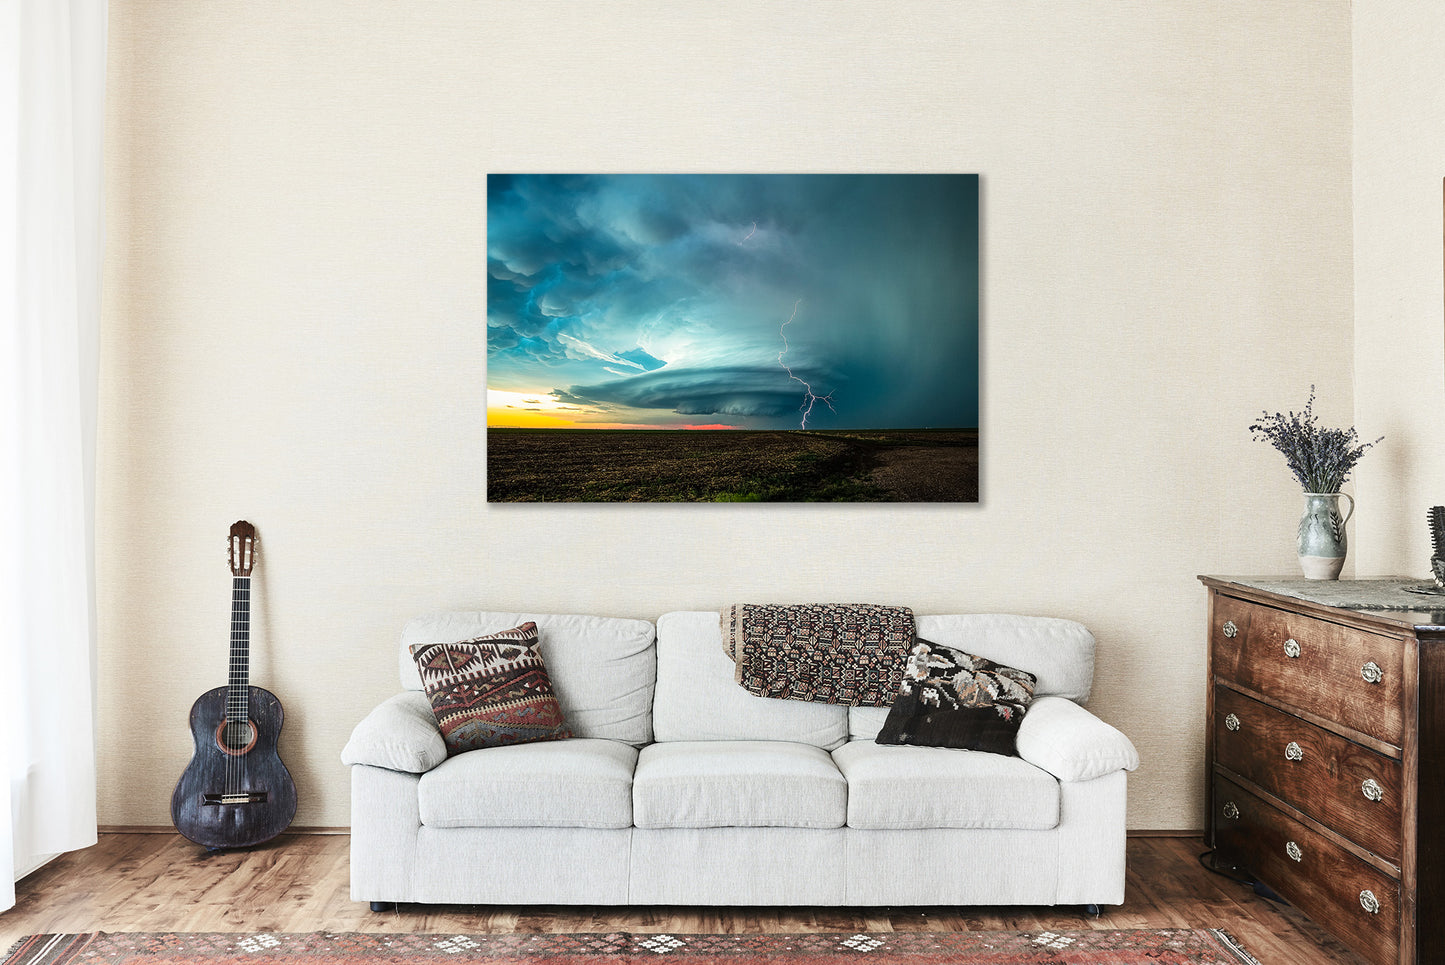 Storm Canvas | Supercell Thunderstorm Gallery Wrap | Lightning Photography | Kansas Wall Art | Nature Decor | Ready to Hang